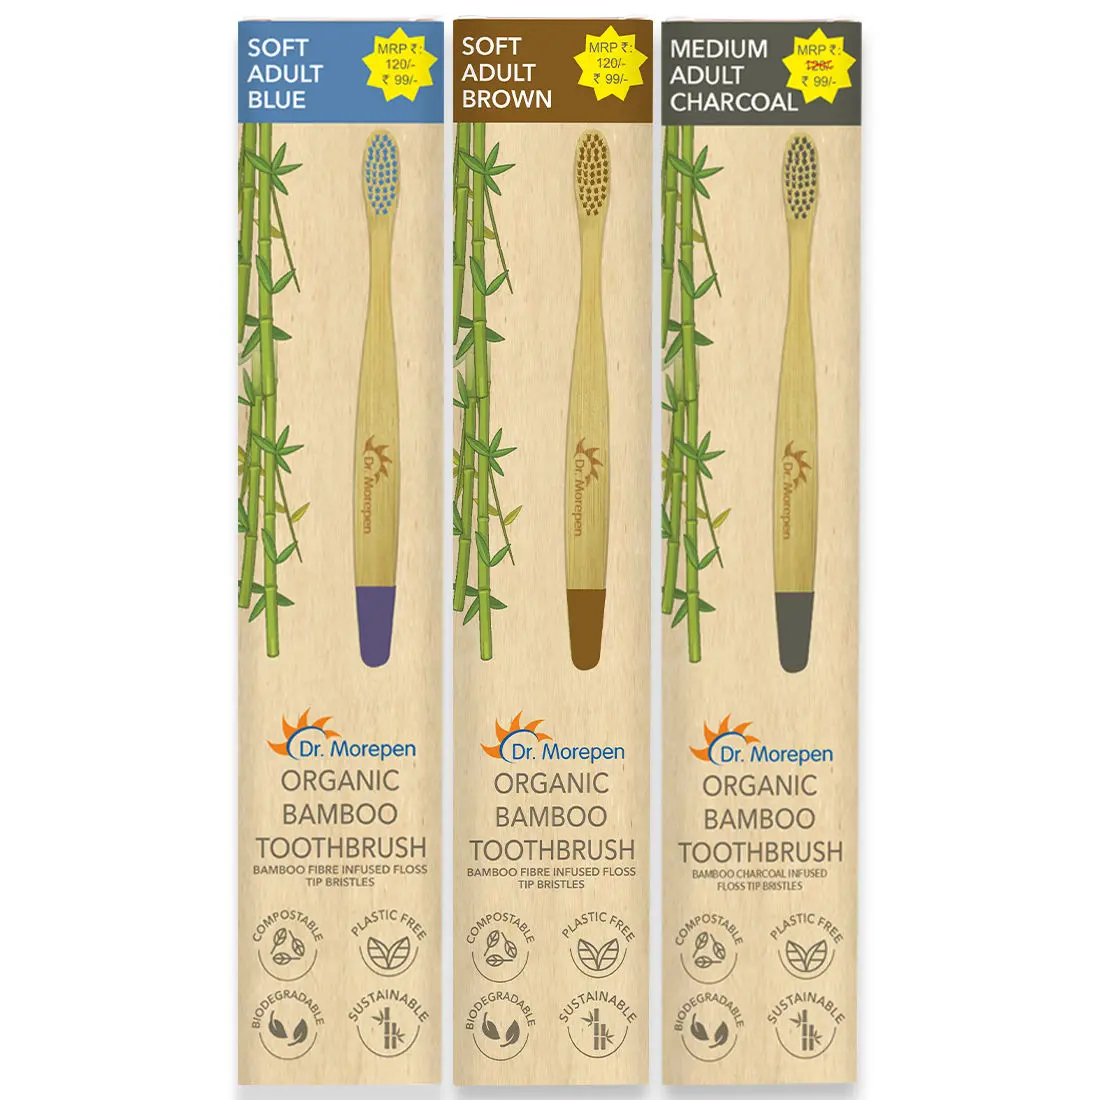 DR. MOREPEN Organic Bamboo Toothbrush For Adults - Blue, Brown & Charcoal